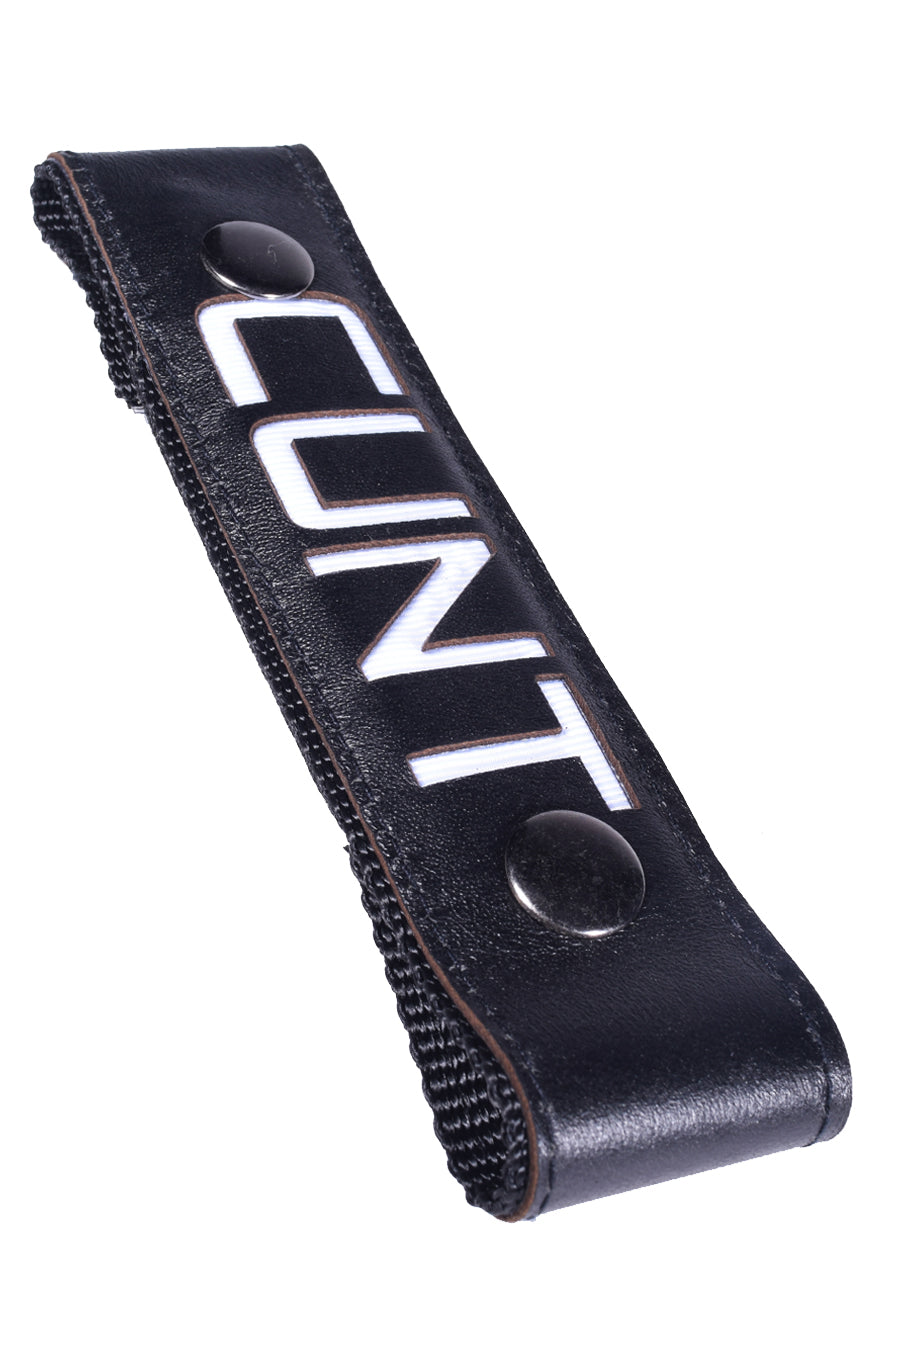 GLOW CENTER STRAP - CUNT - DealByEthan.gay